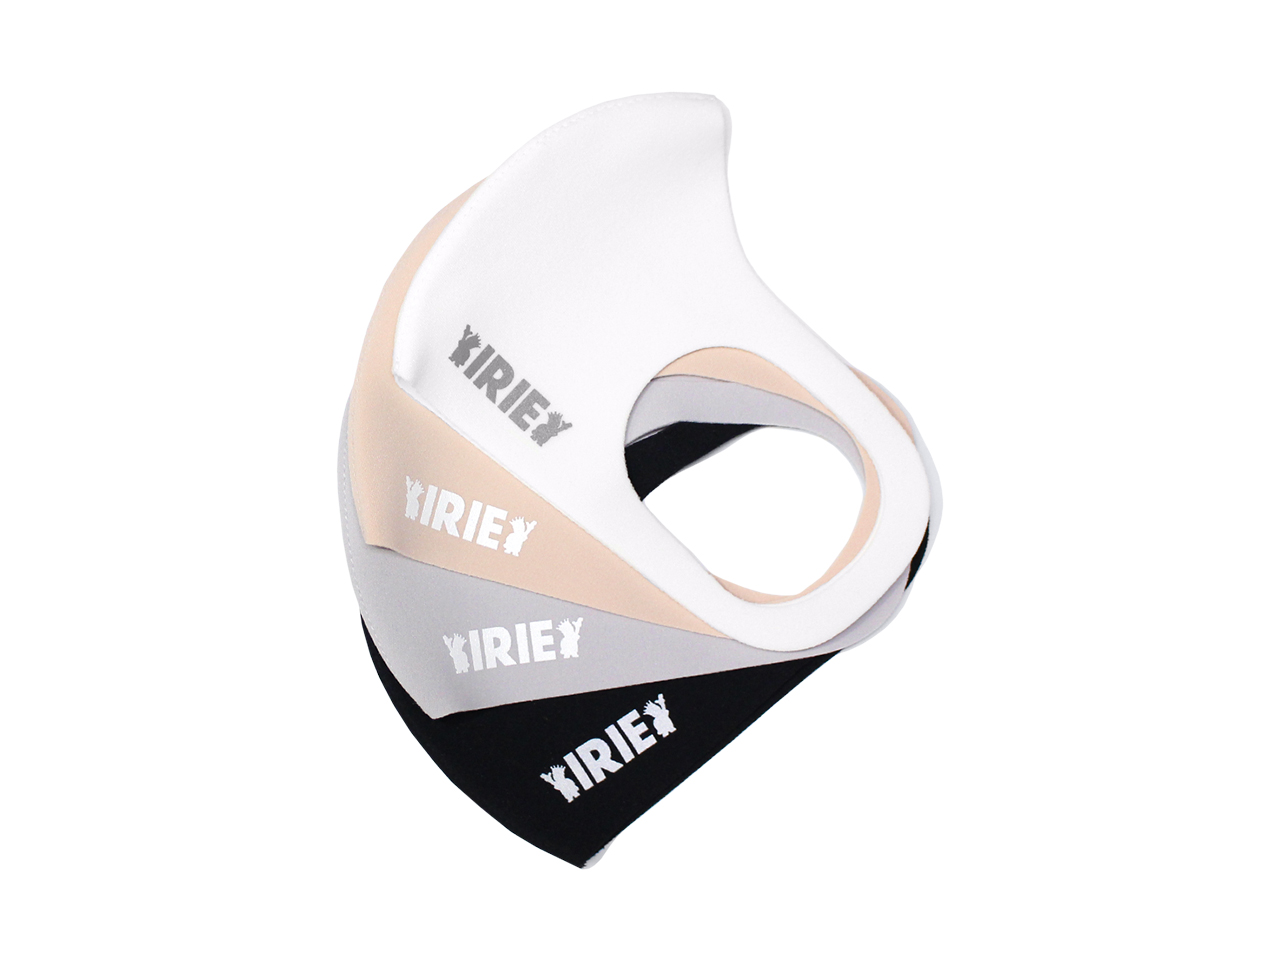 IRIE FACE MASK (M size) - IRIE by irielife